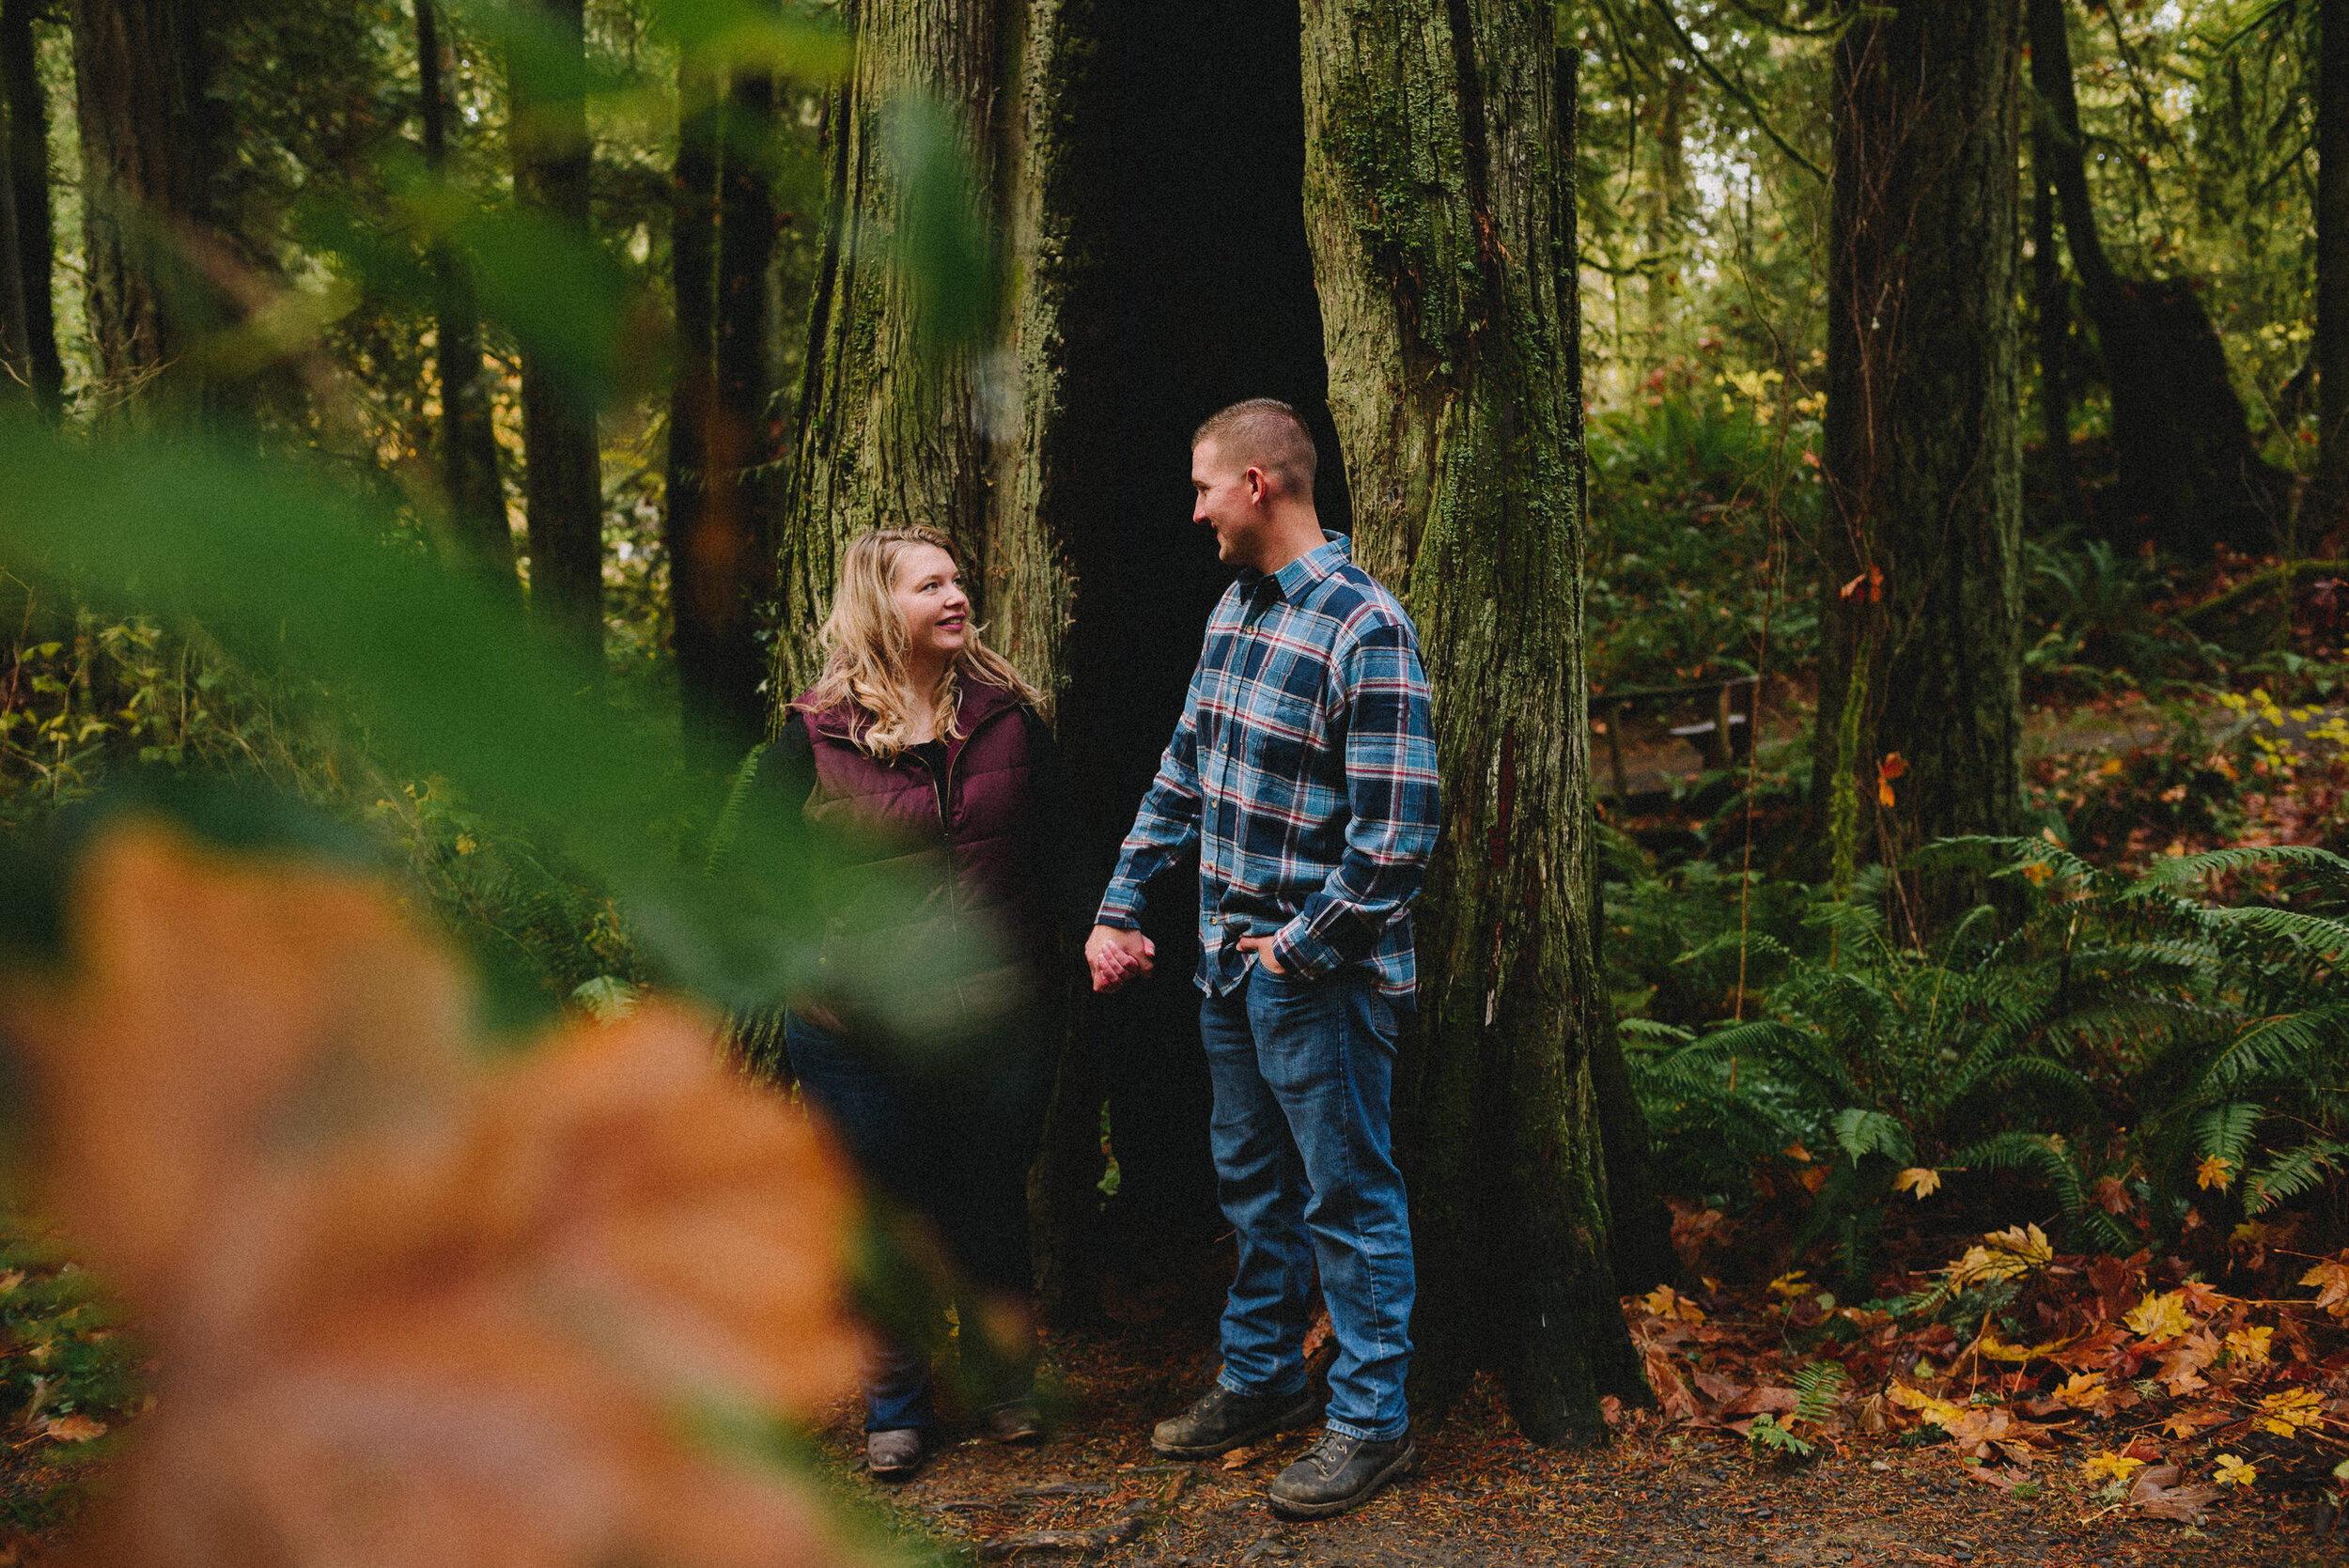 priest-point-park-couples-session-olympia-washington-way-up-north-photography (85).jpg